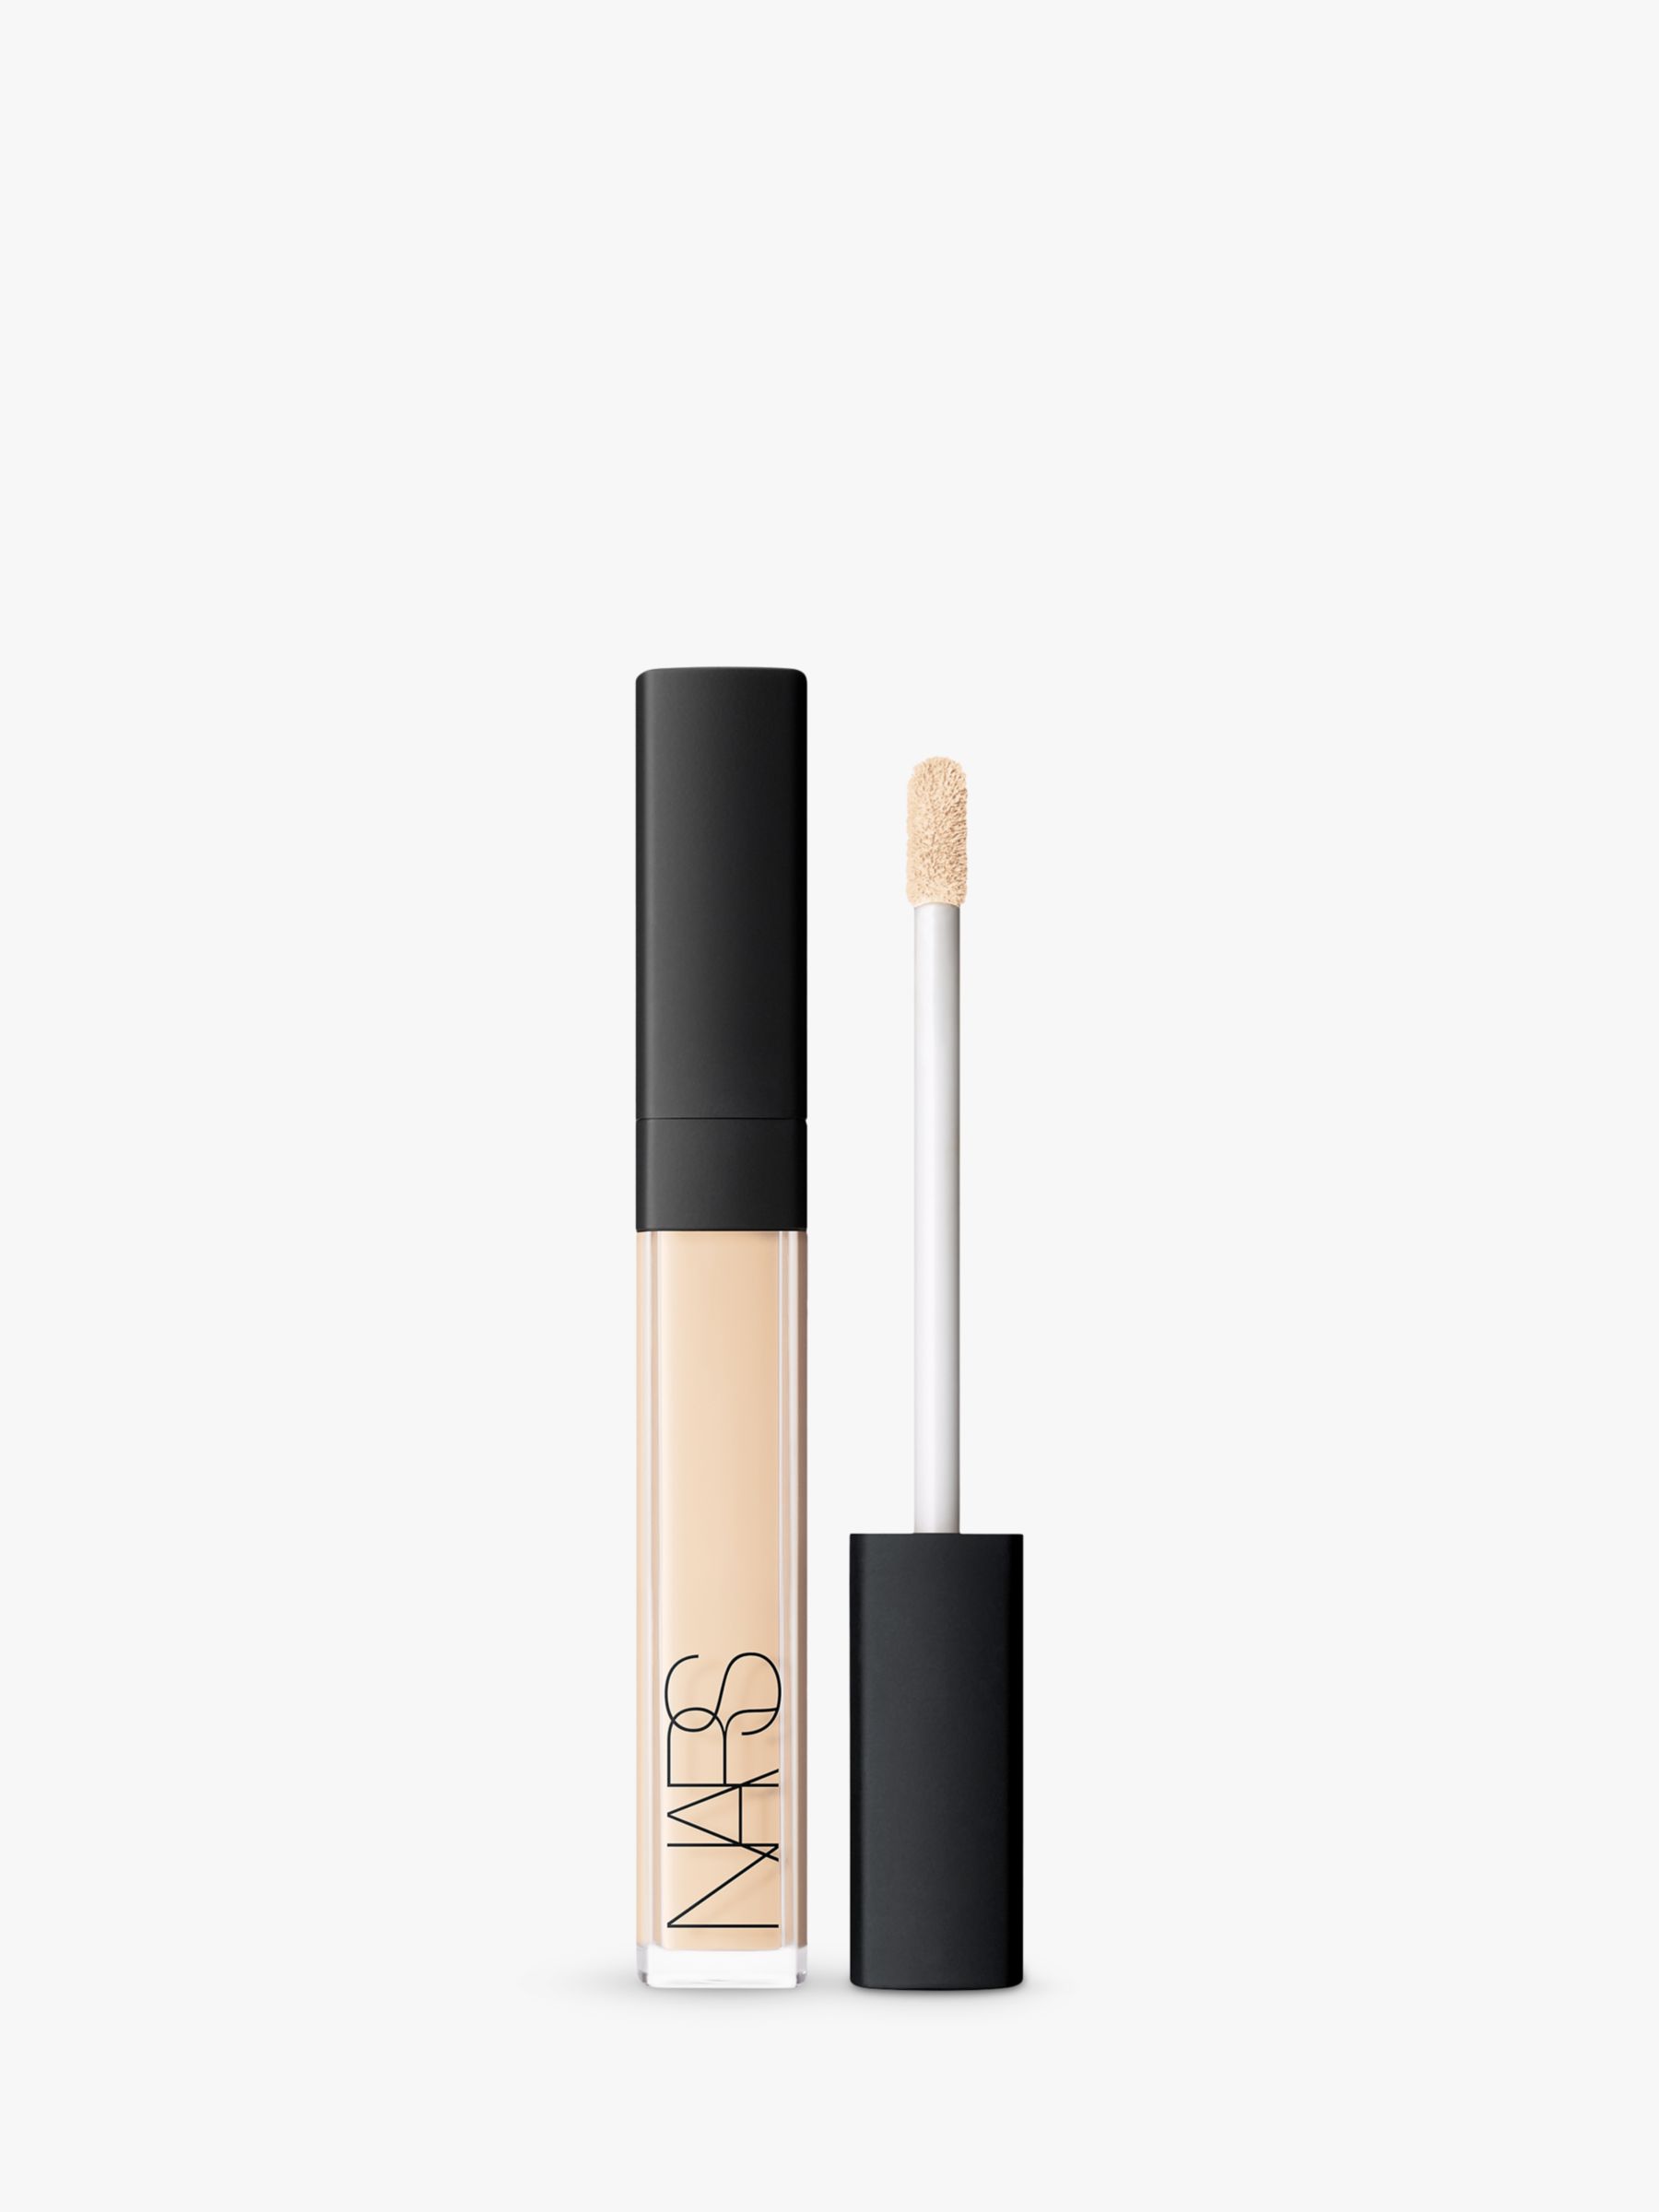 NARS Radiant Creamy Concealer, Chantilly 1